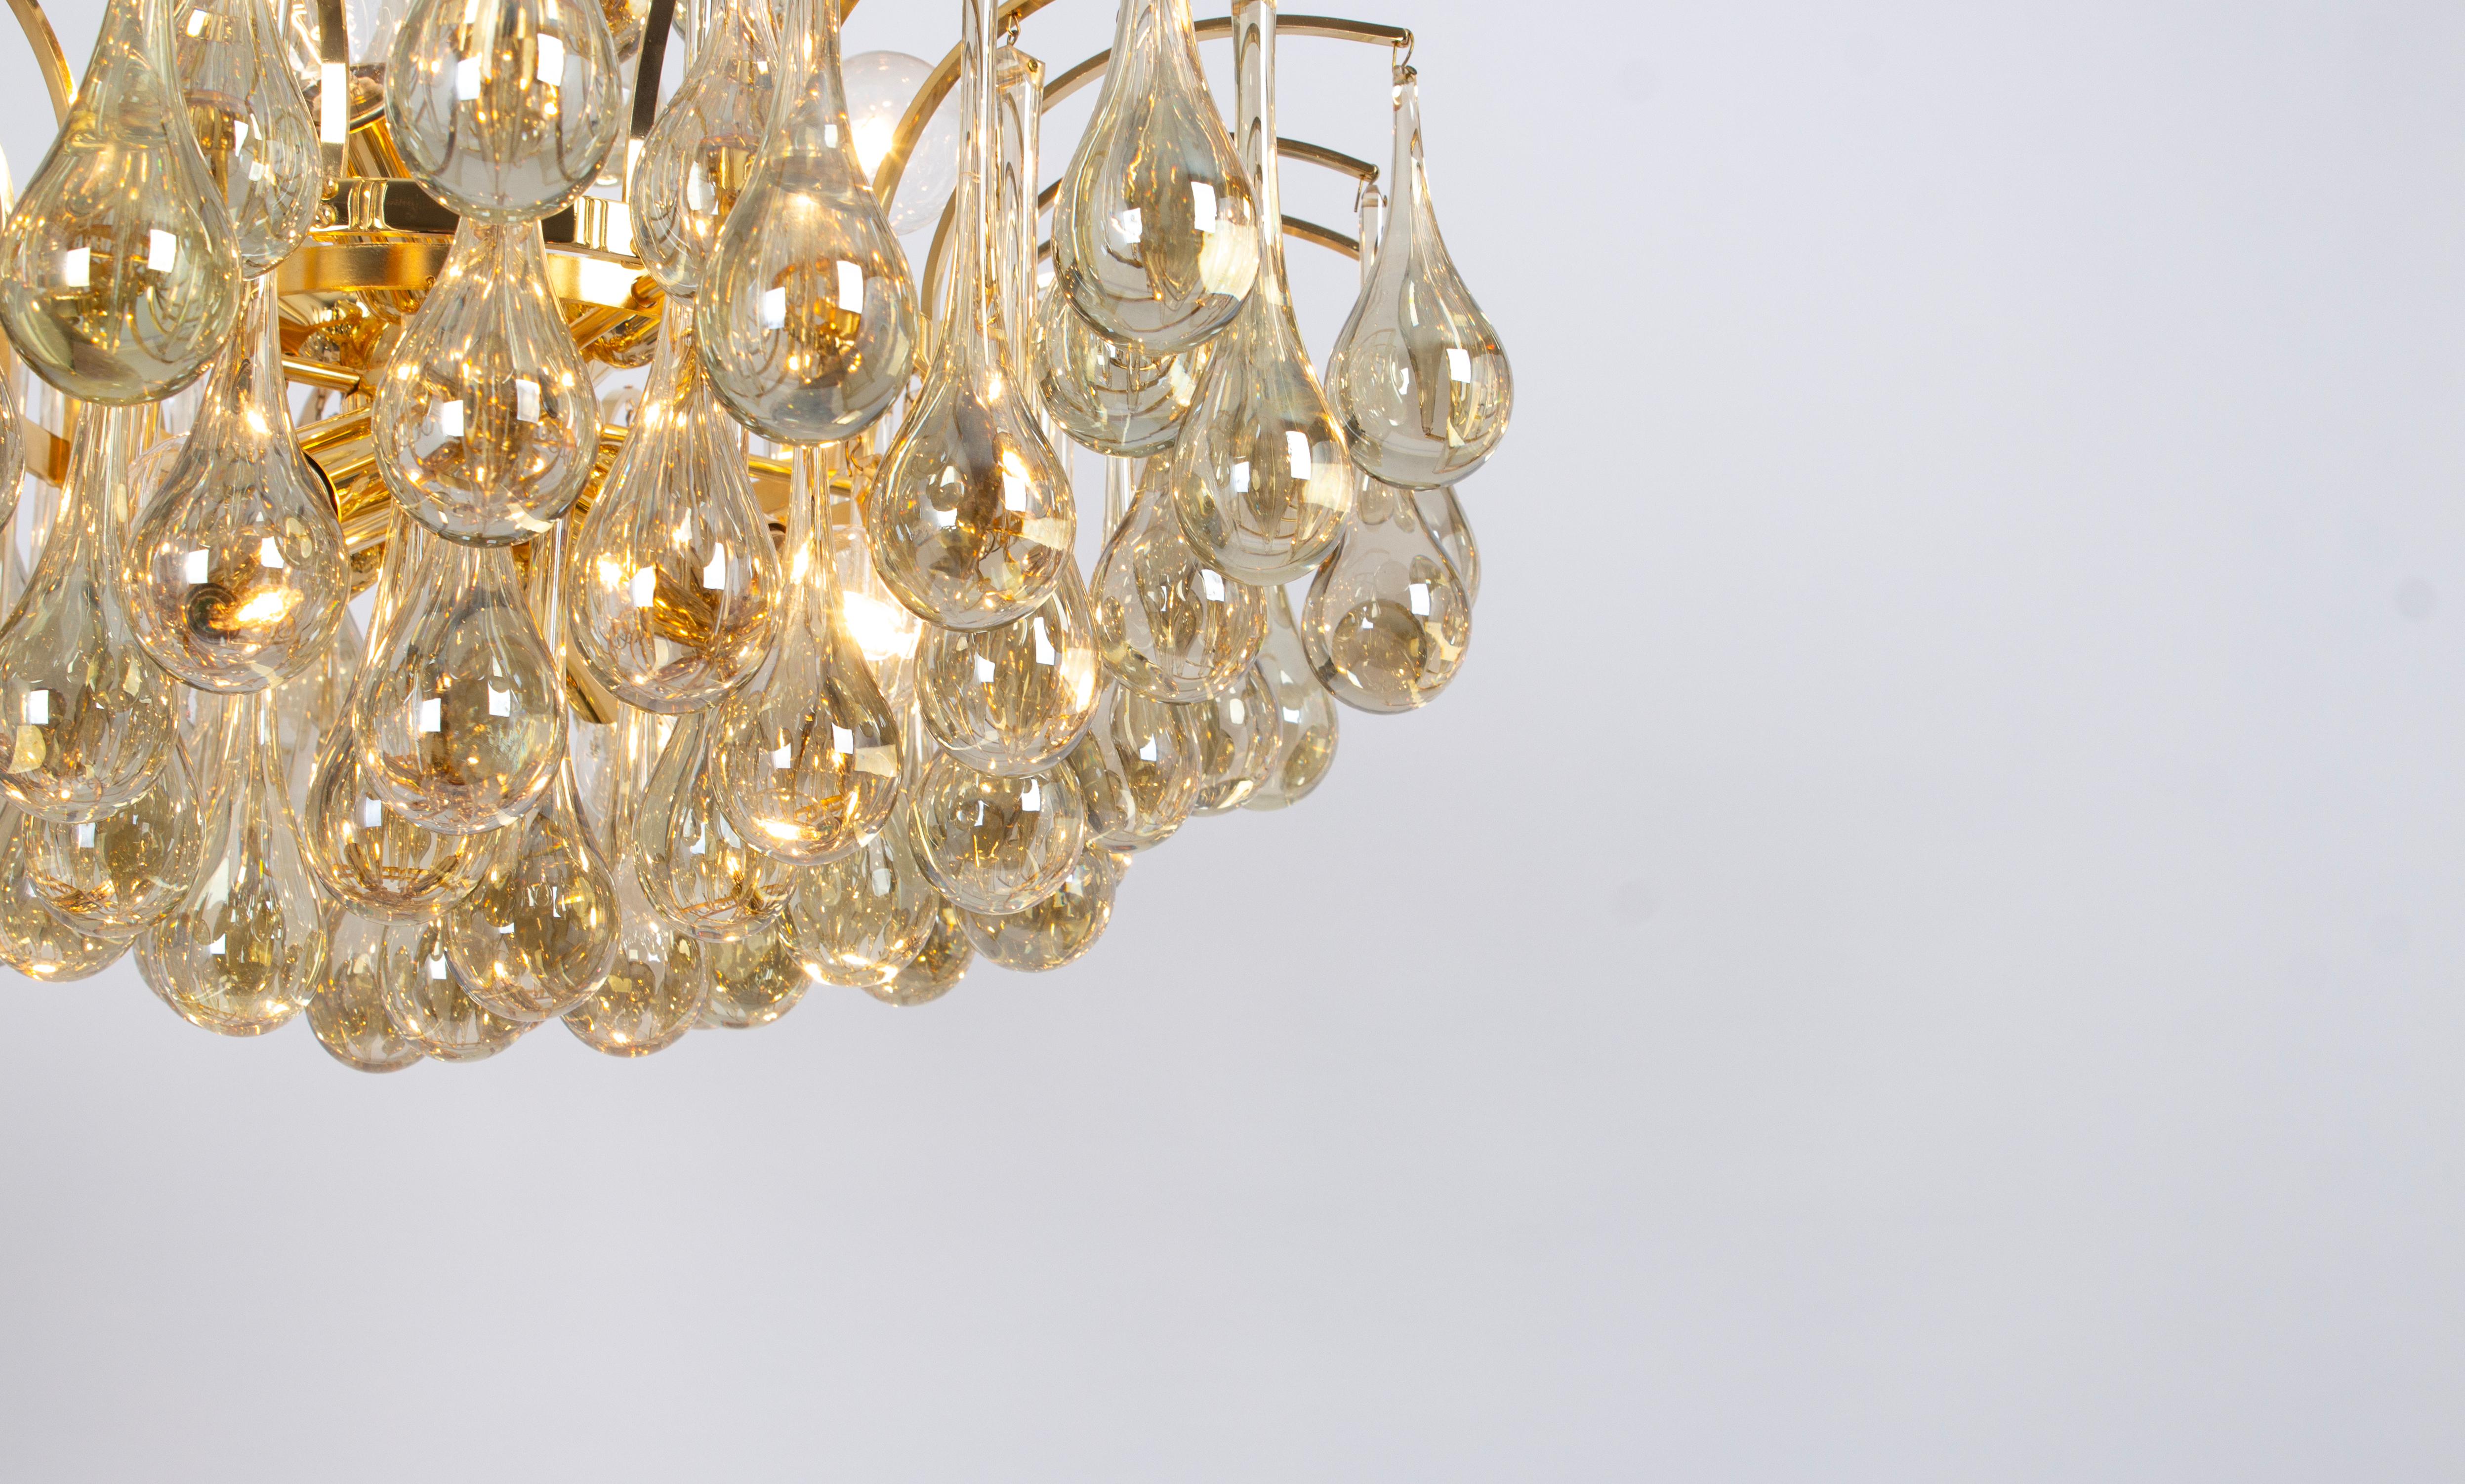 Large Murano Glass Tear Drop Chandelier, Christoph Palme, Germany, 1970s For Sale 3